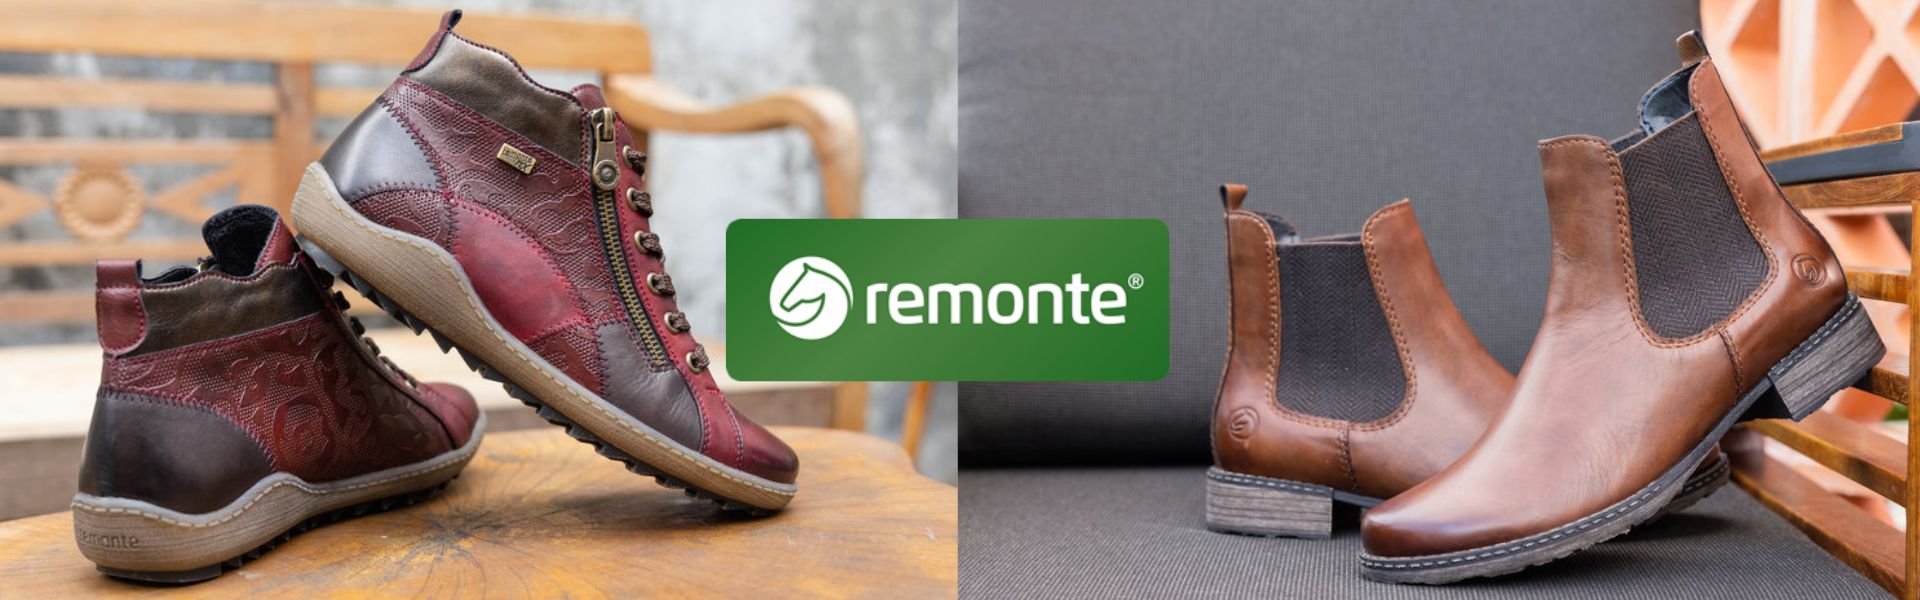 Remonte Shoes & Boots